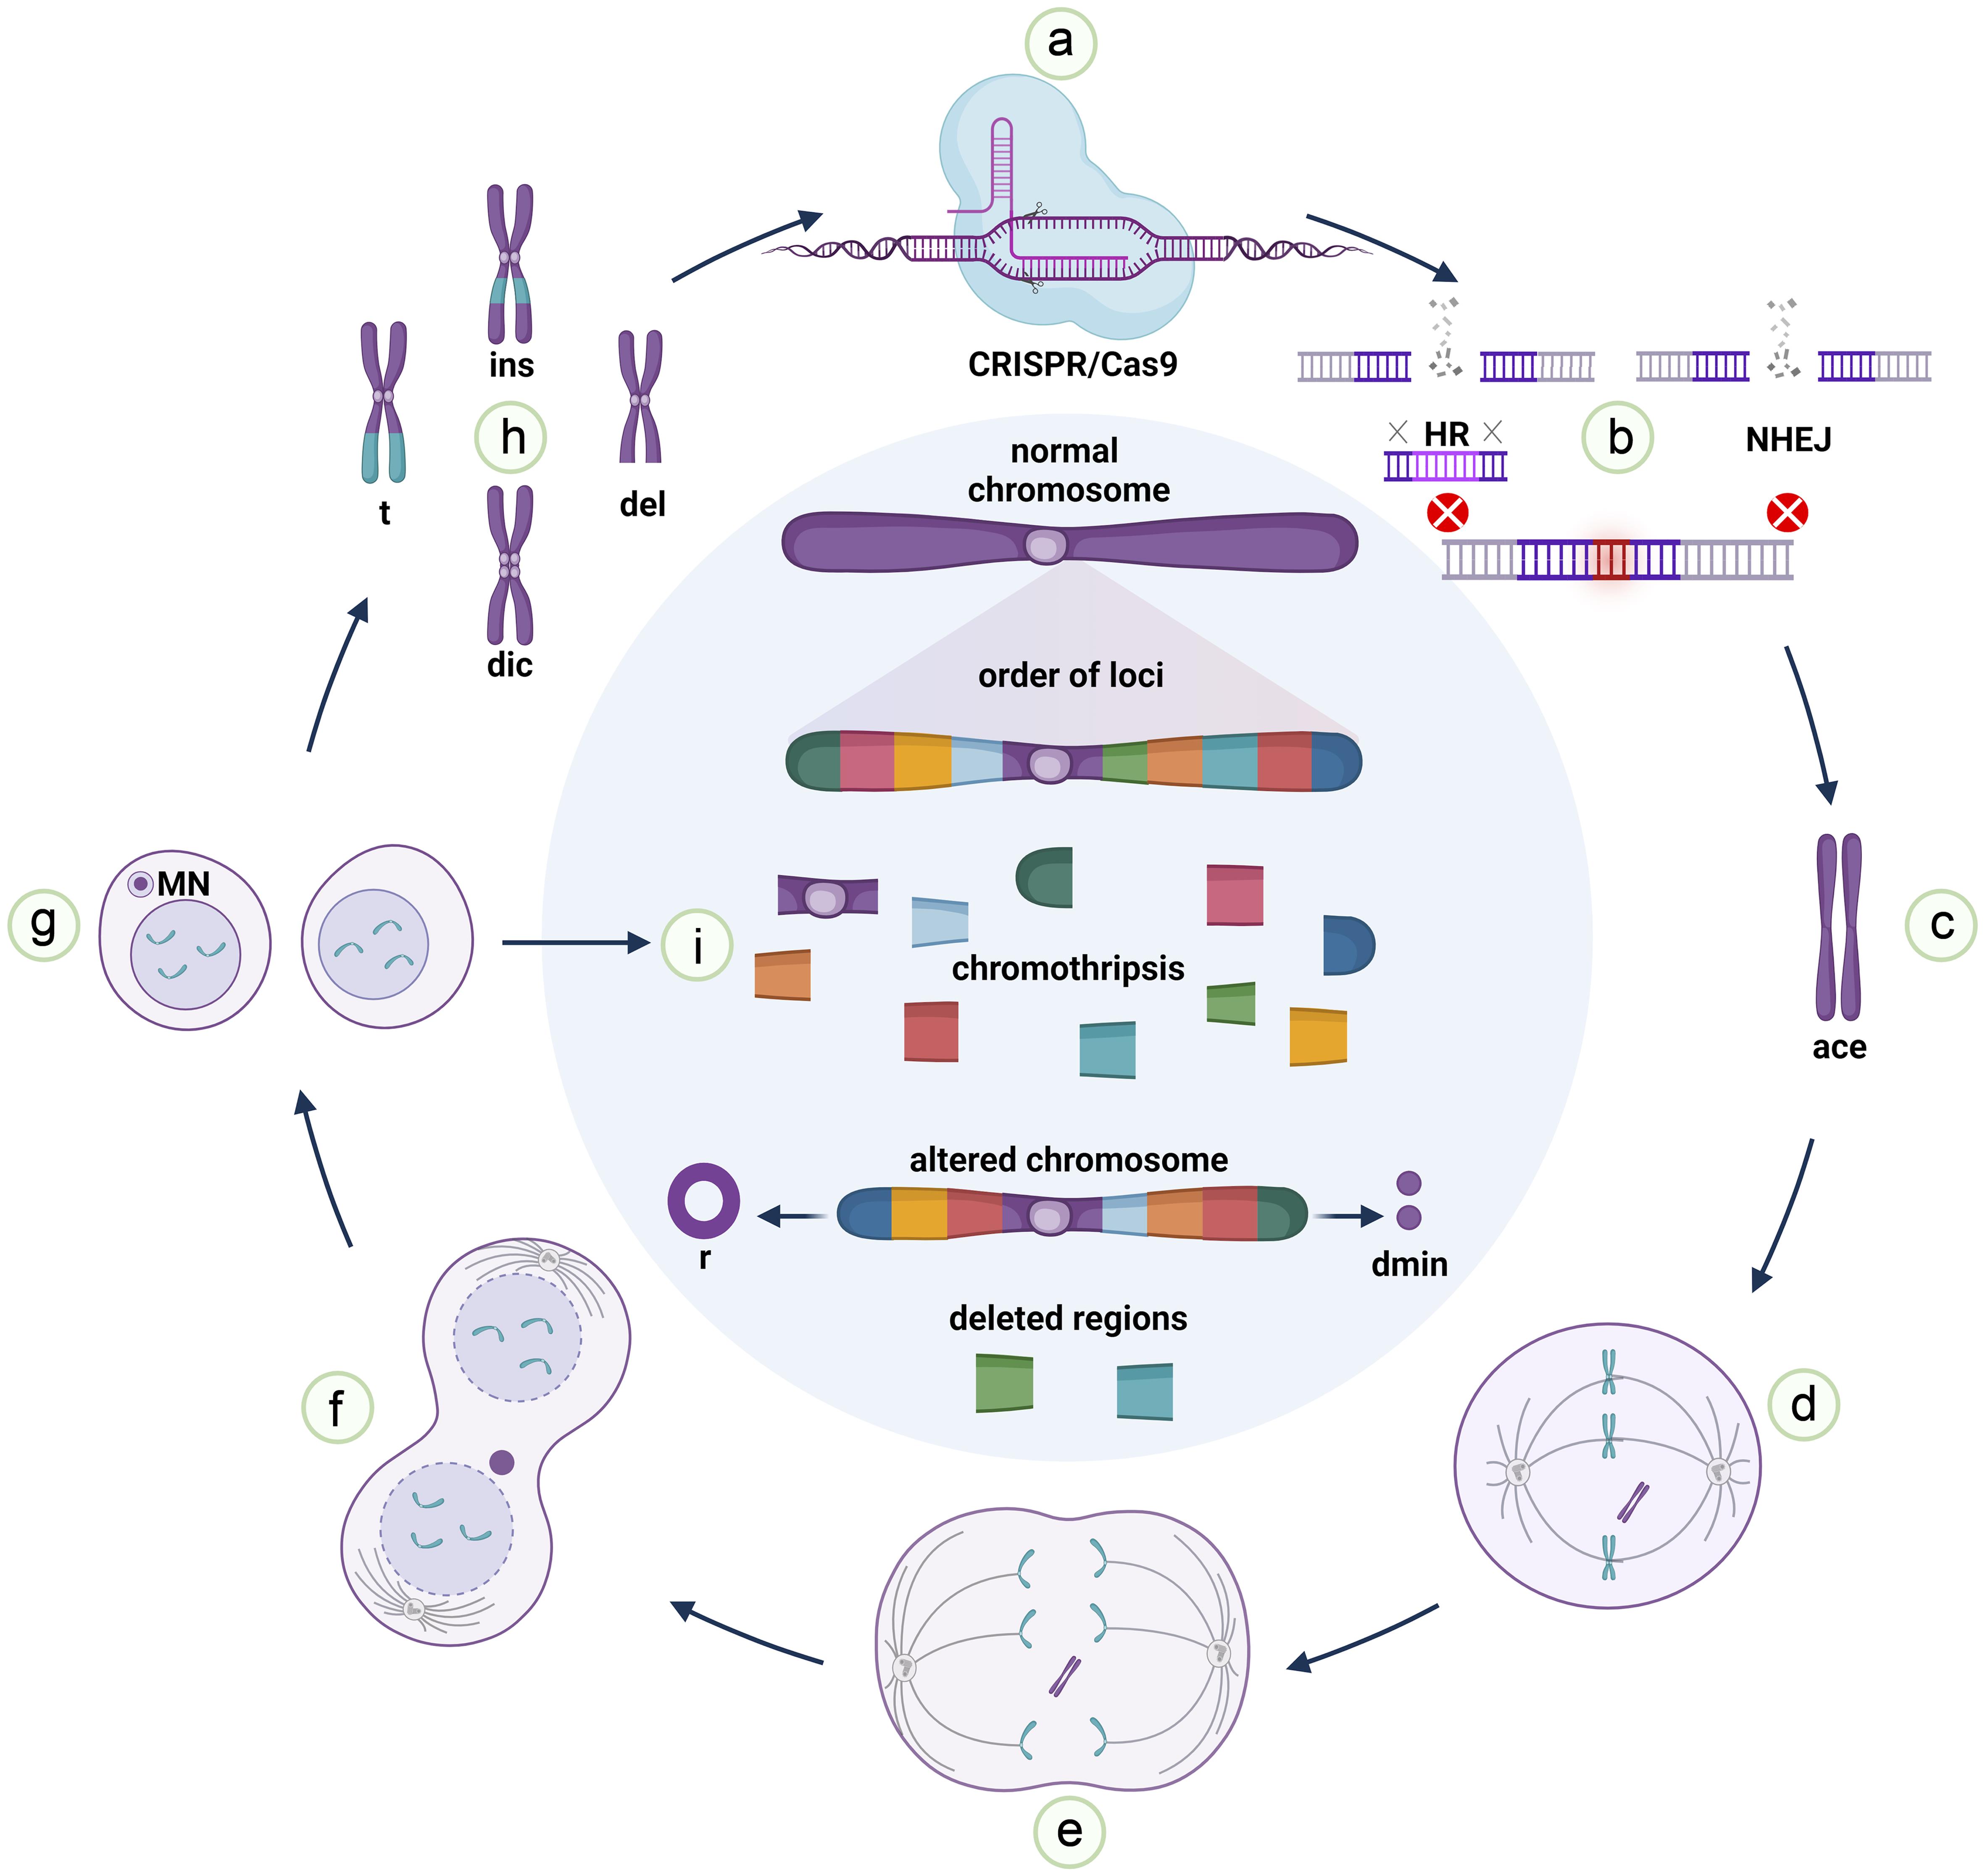 Micronuclei formation and chromothripsis induced by CRISPR/Cas9.